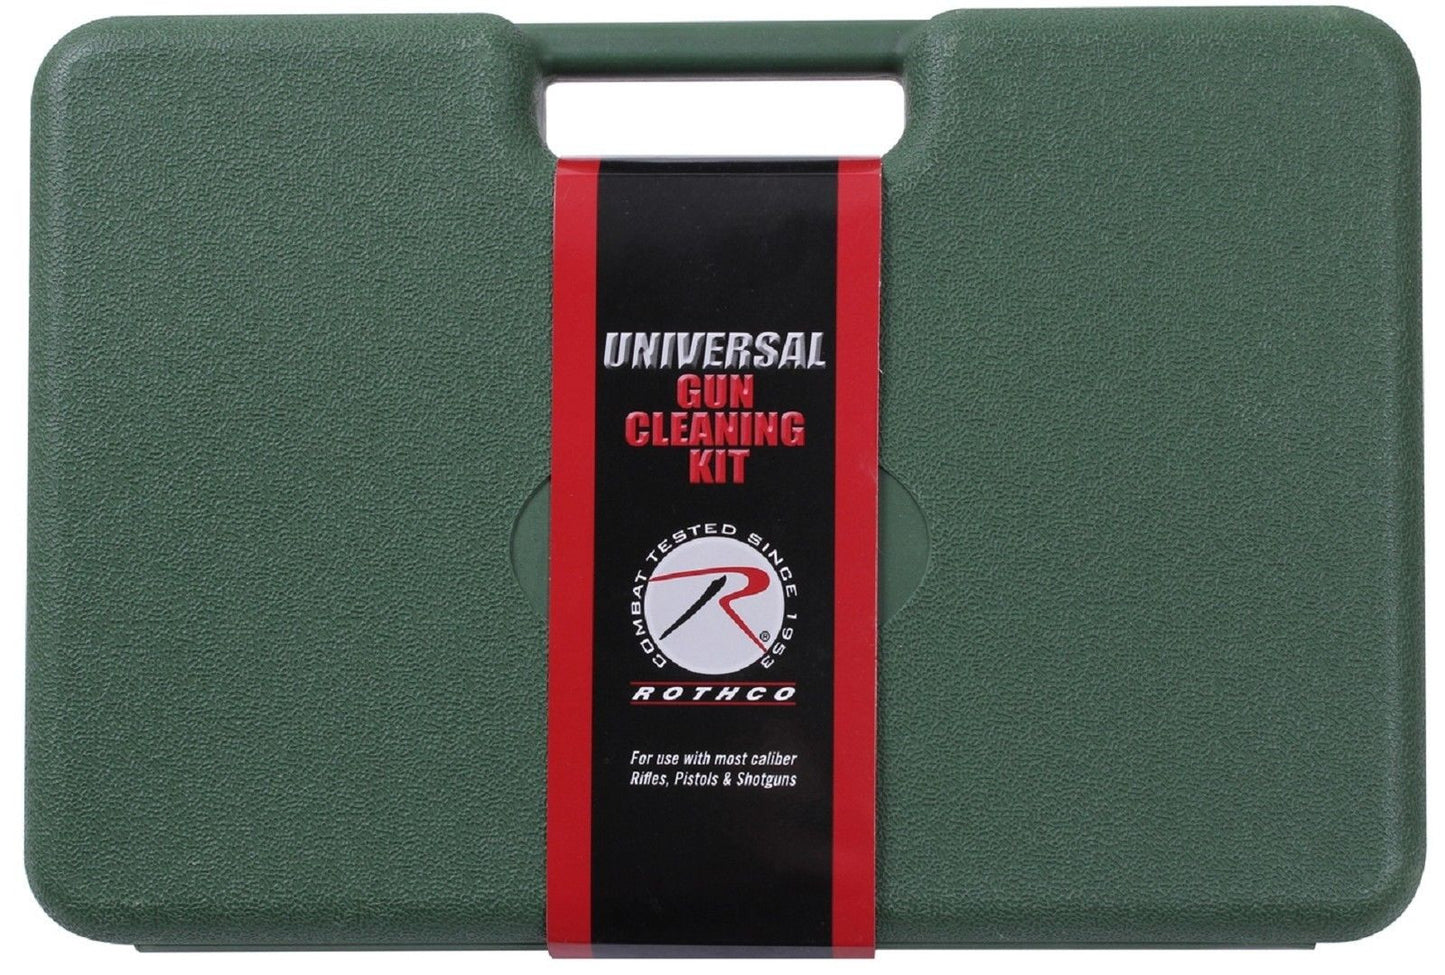 Universal Cleaning Kit - Rothco 159 Piece Kits